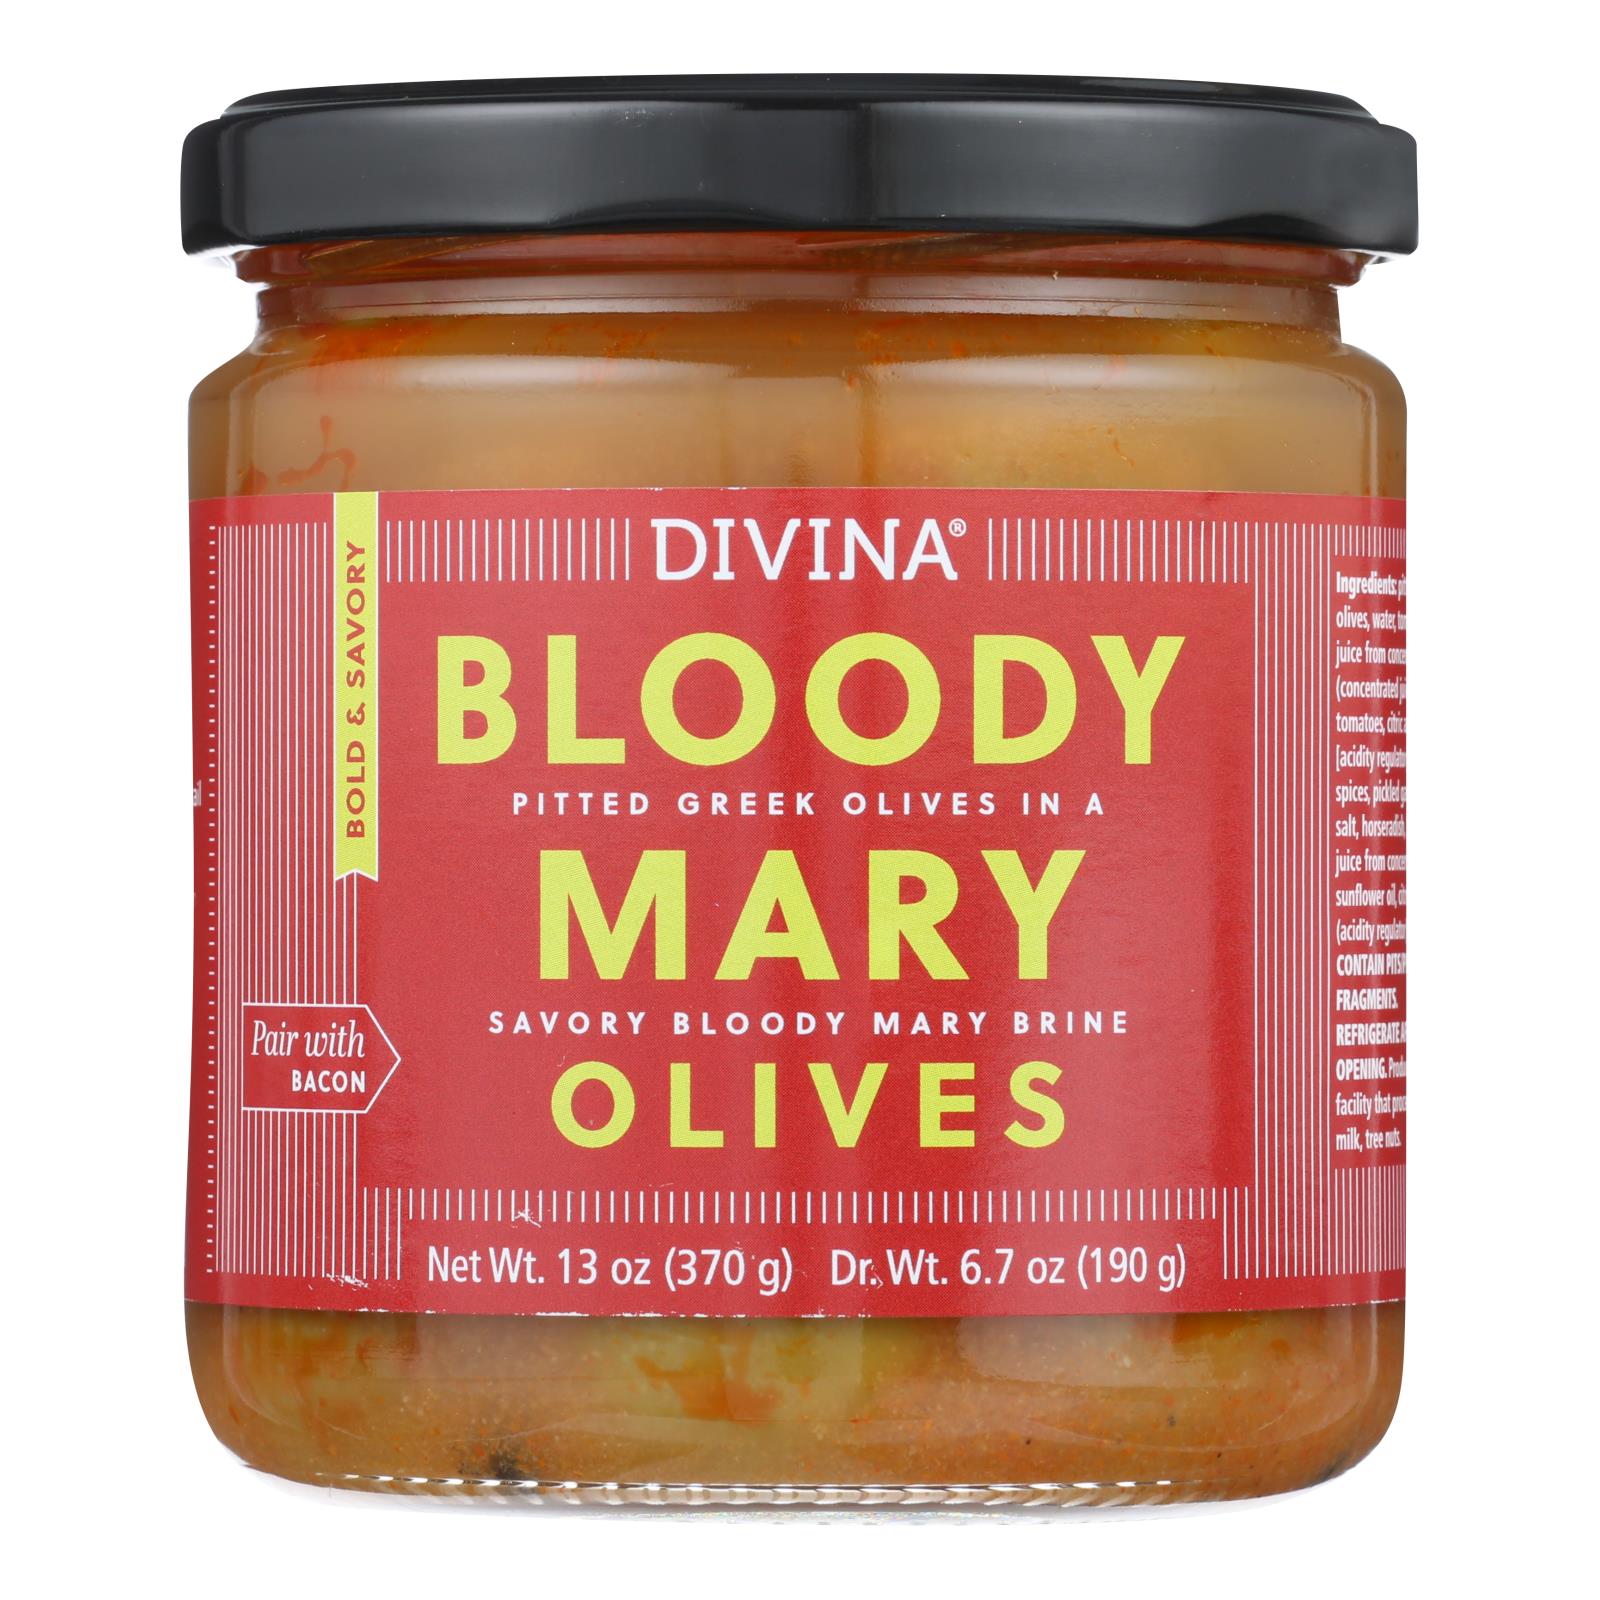 Divina - Olives Bloody Mary - 6개 묶음상품 - 13 OZ